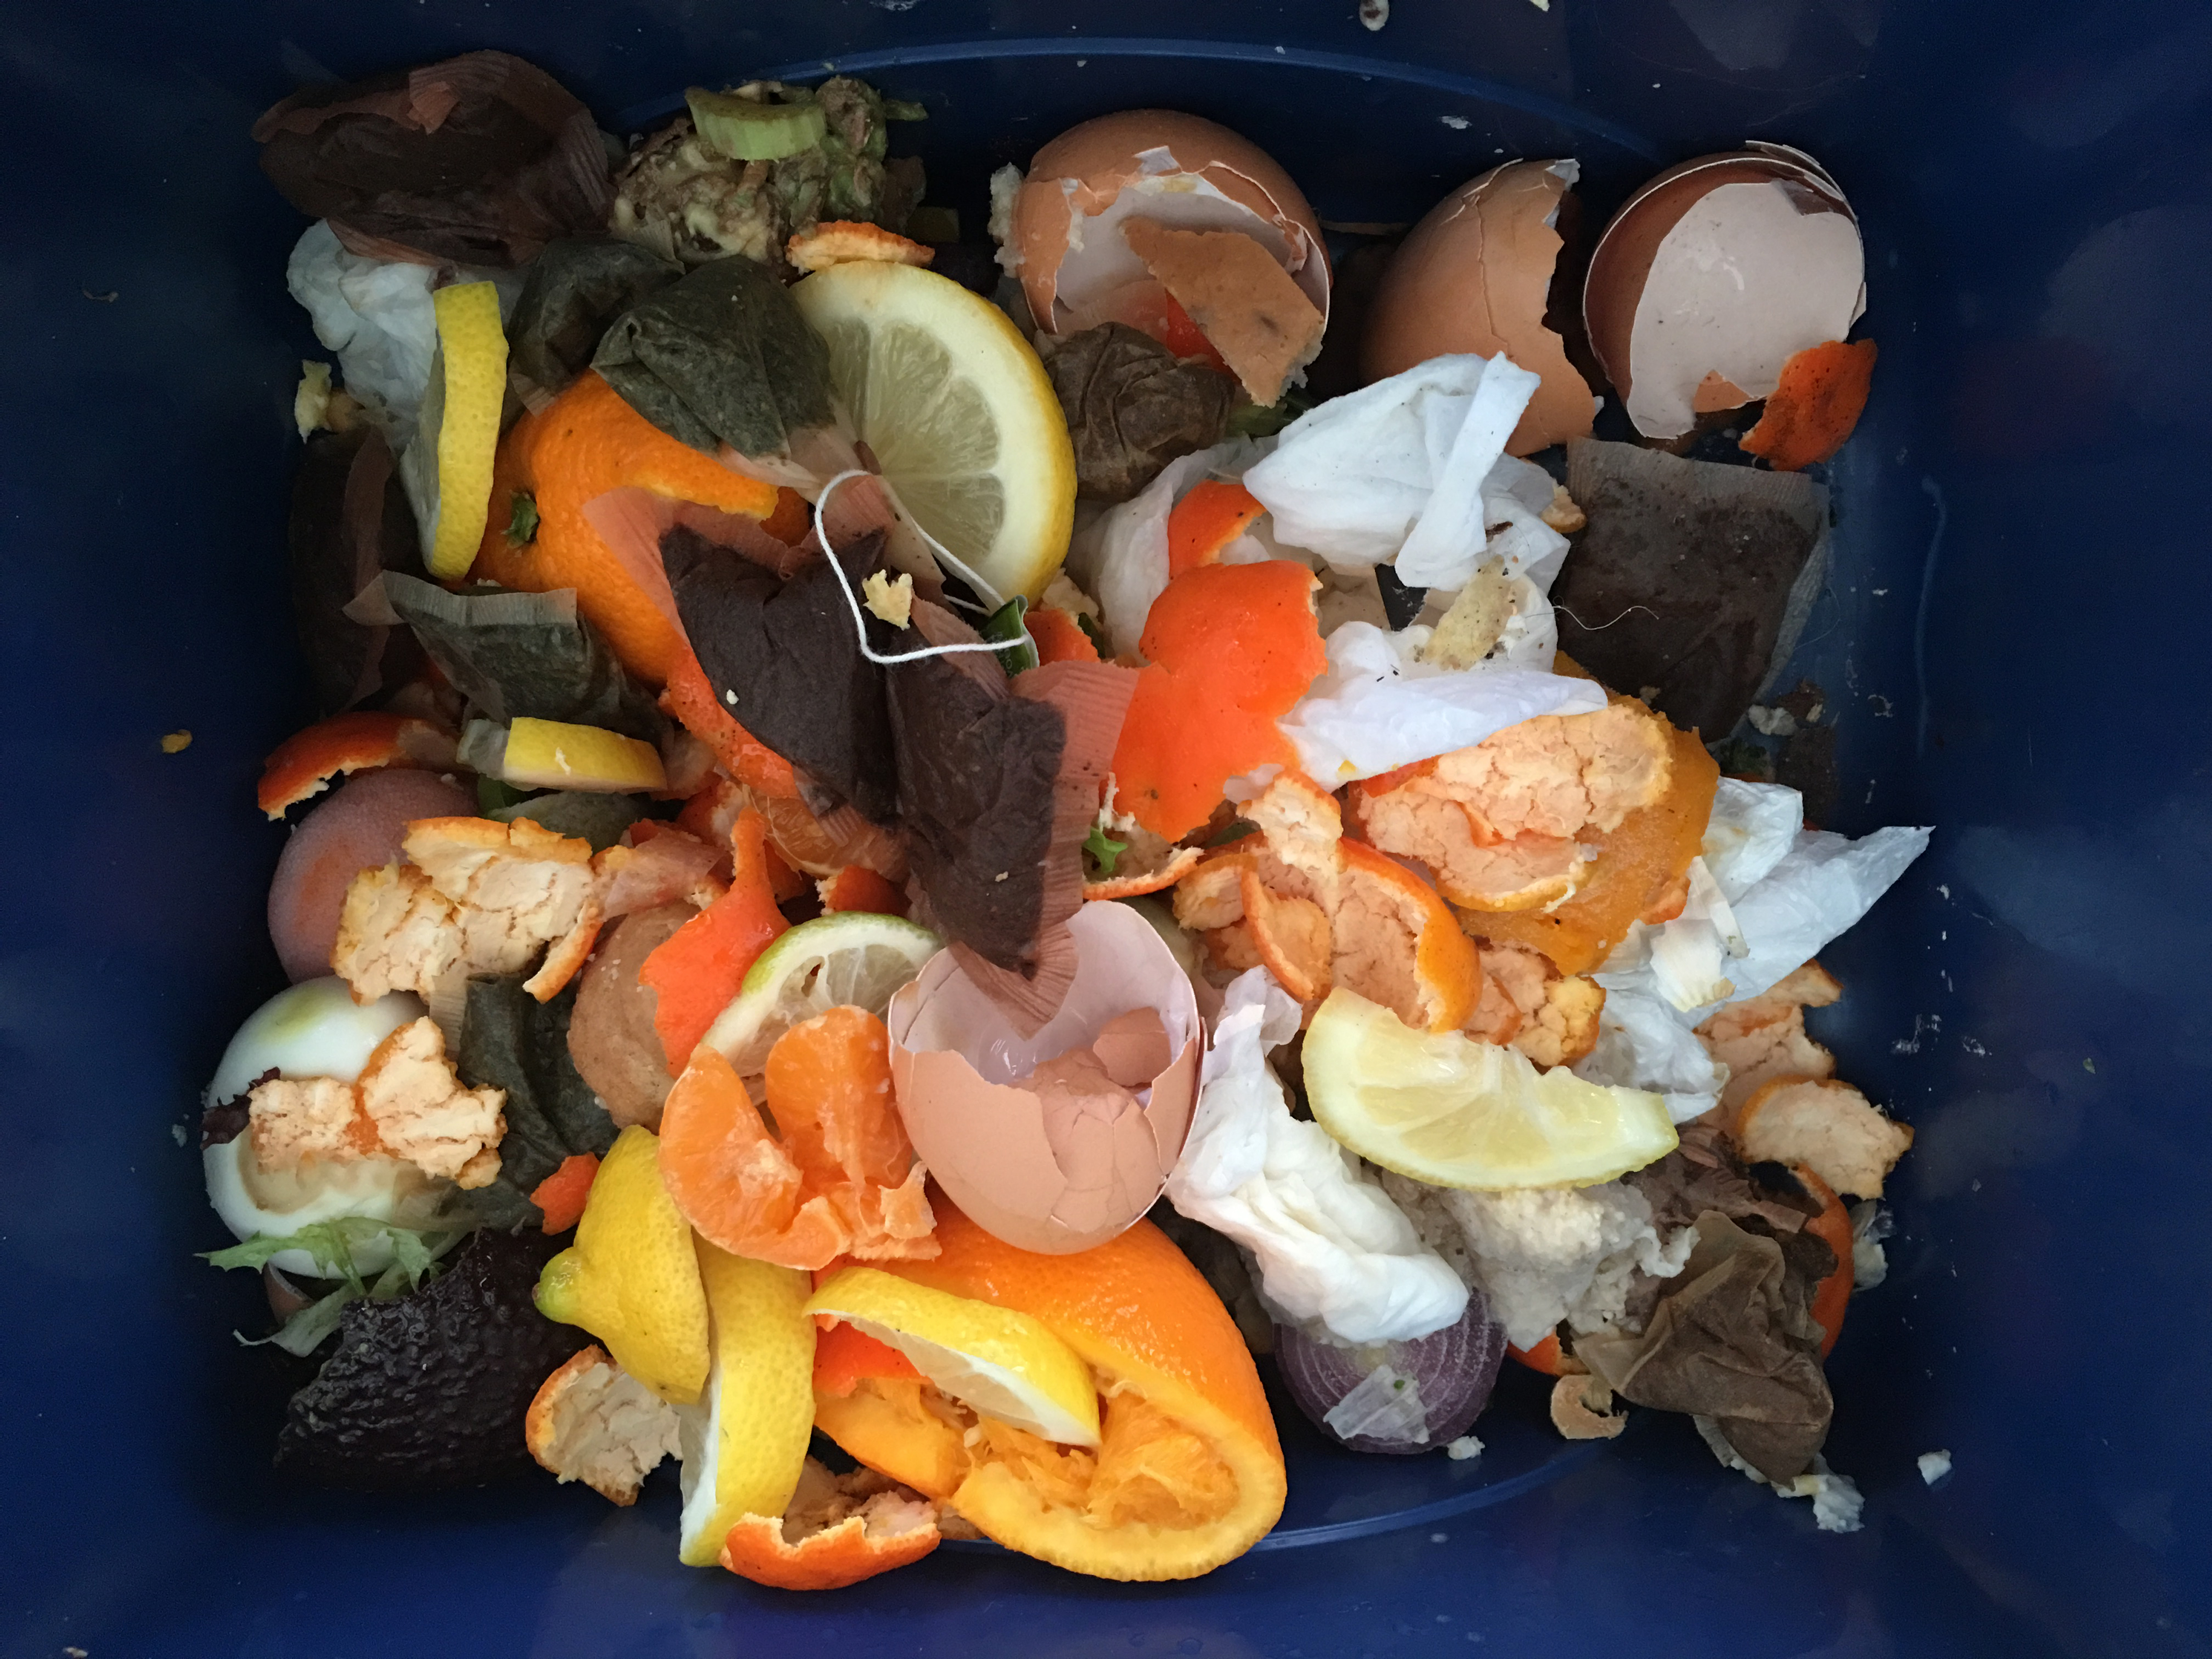 Food and horticultural waste